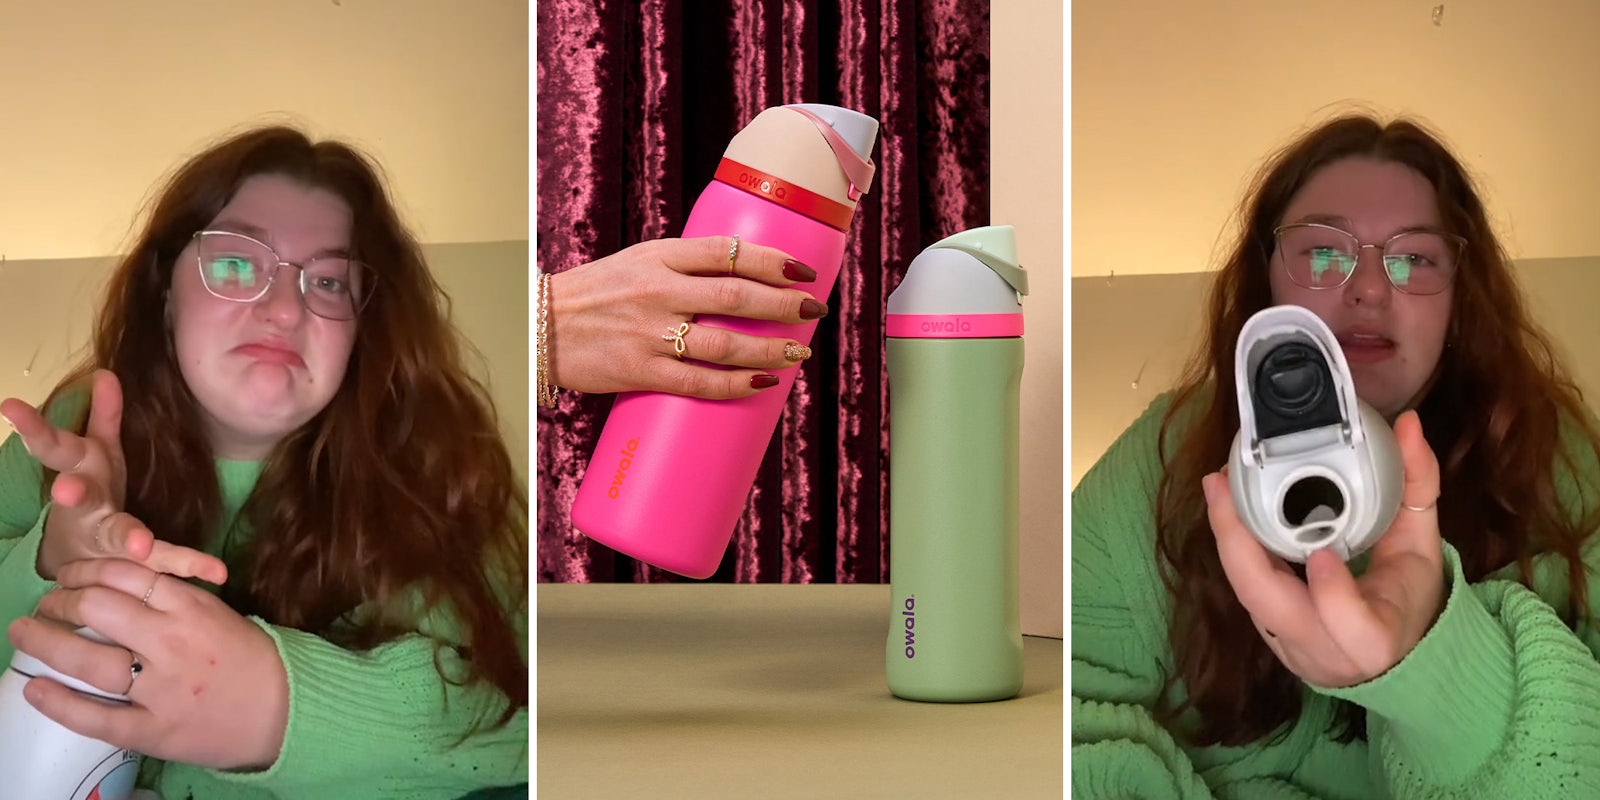 Woman shares PSA on how to properly clean reusable bottles after hers sent her to urgent care 4 times